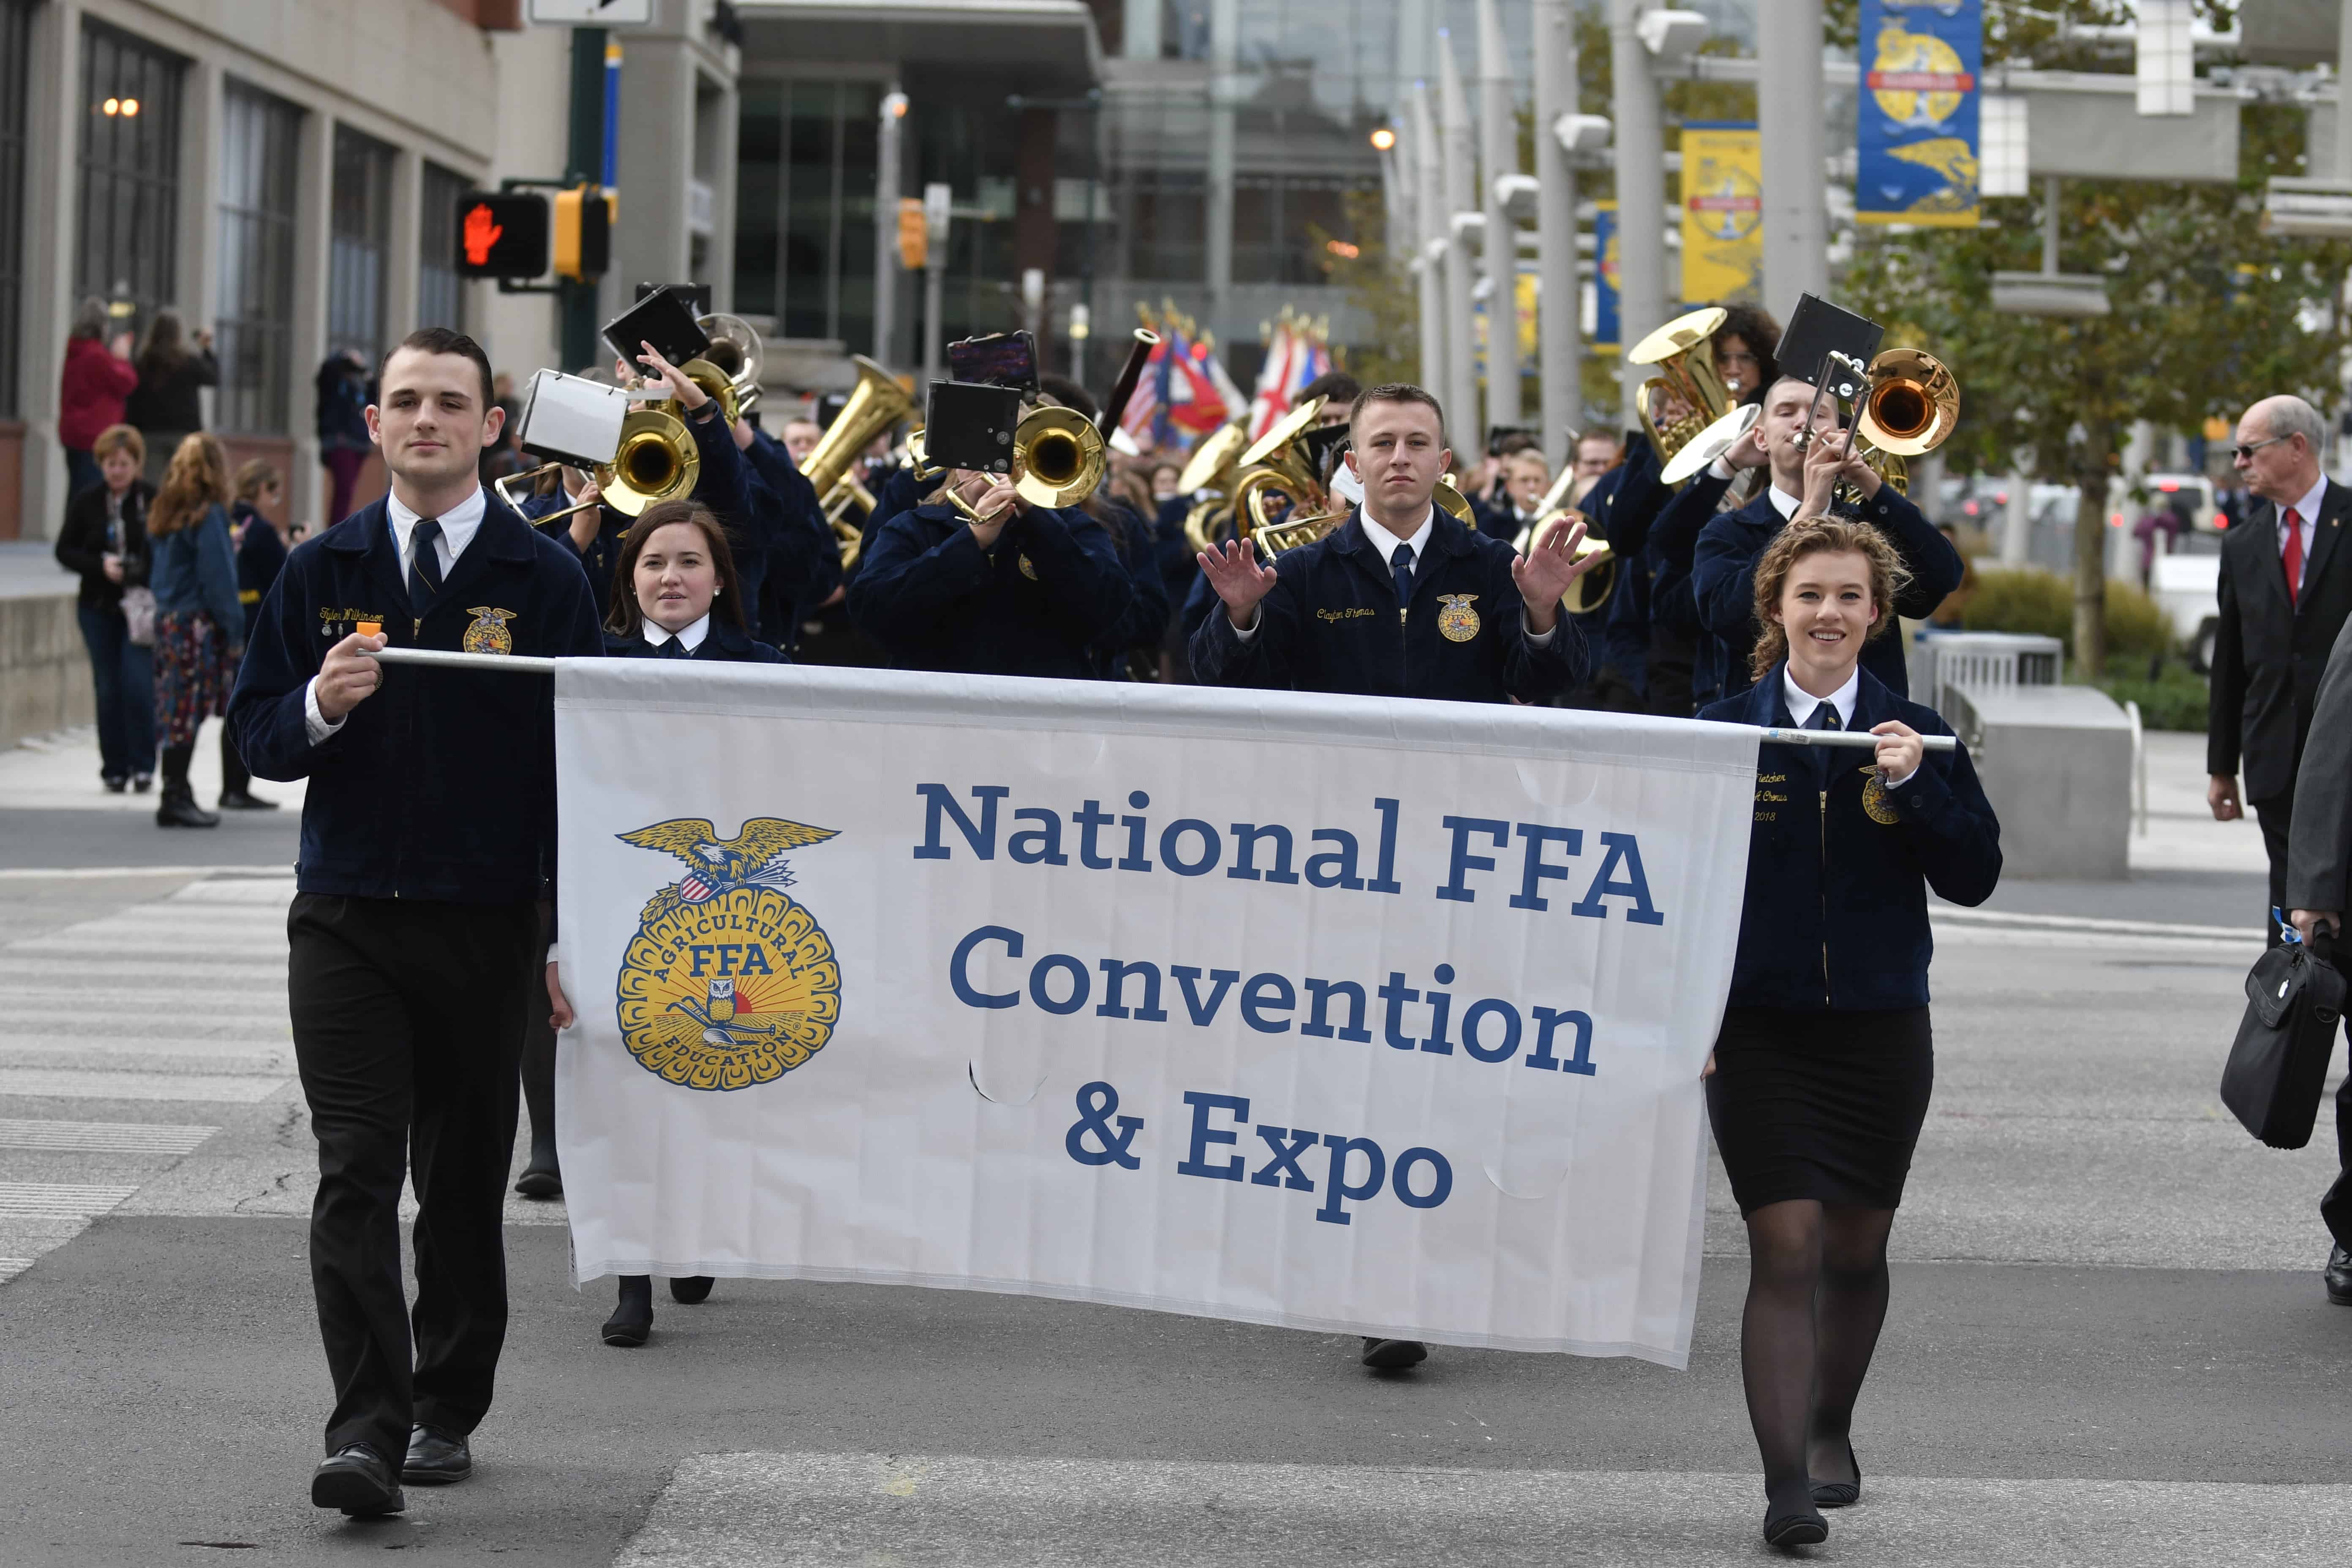 National Ffa Convention 2022 Schedule Know Before You Go: National Ffa Convention & Expo - National Ffa  Organization